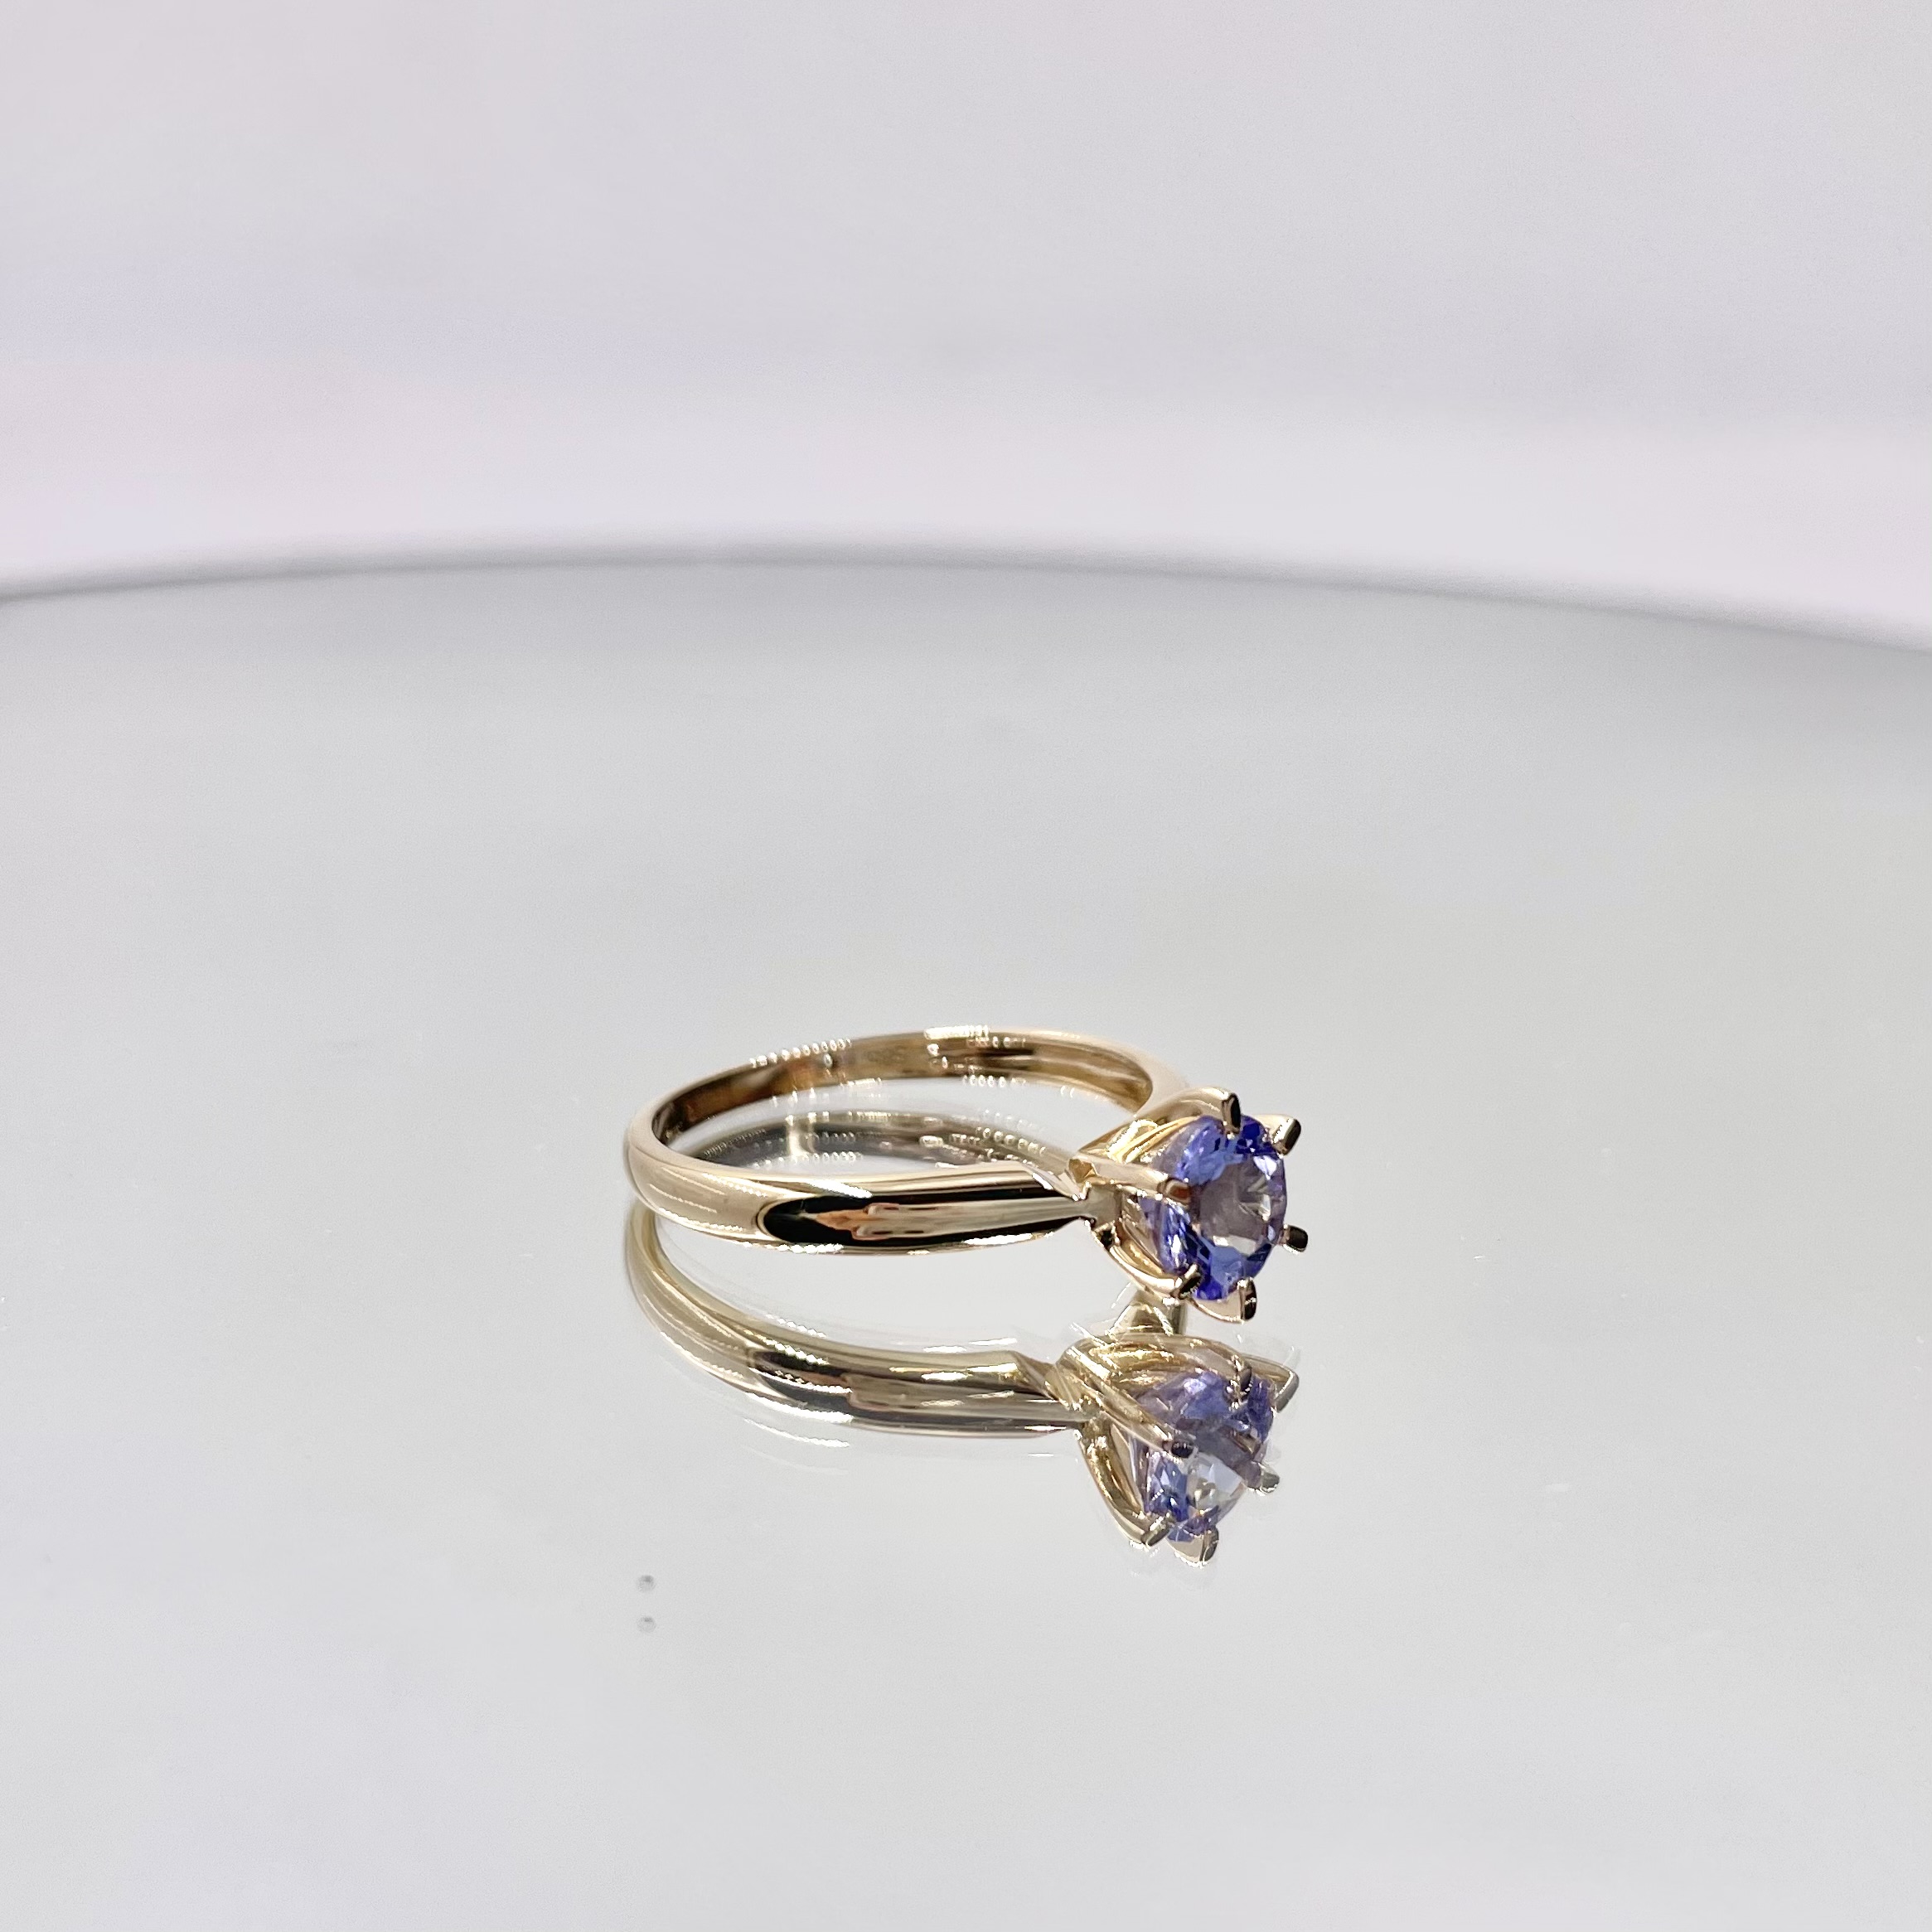 0.8ct 6.0mm Round Cut Natural Tanzanite Six Claw Wedding Ring in 14k Solid Yellow Gold with Gemstone-3